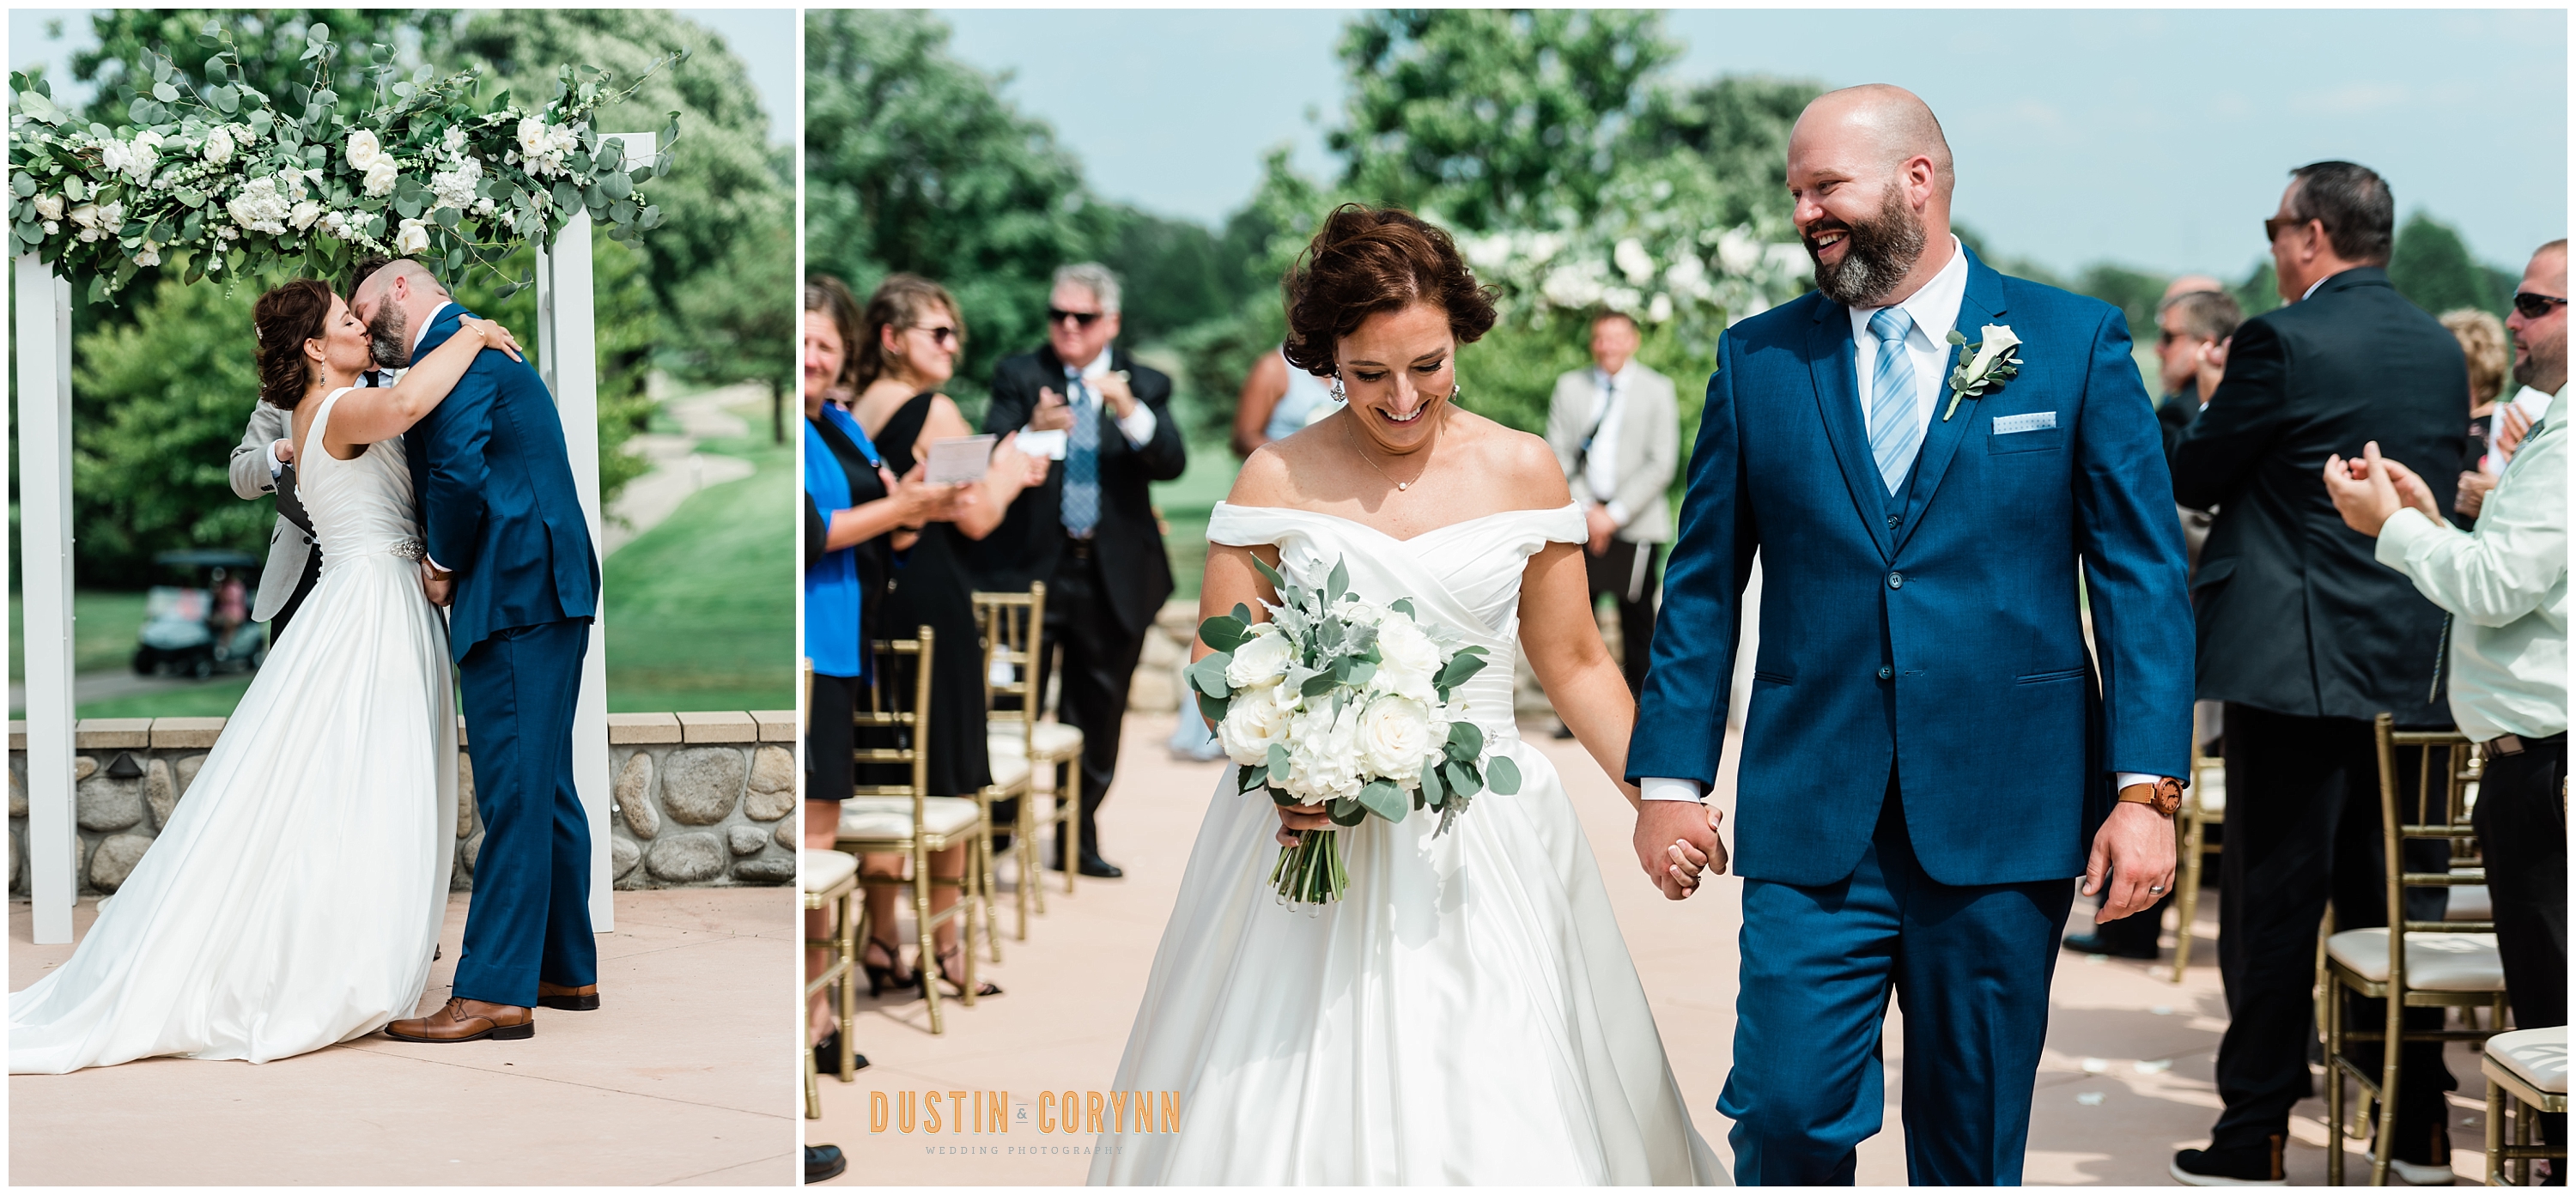 Post-Ceremony Happiness at Pine Valley Country Club Wedding